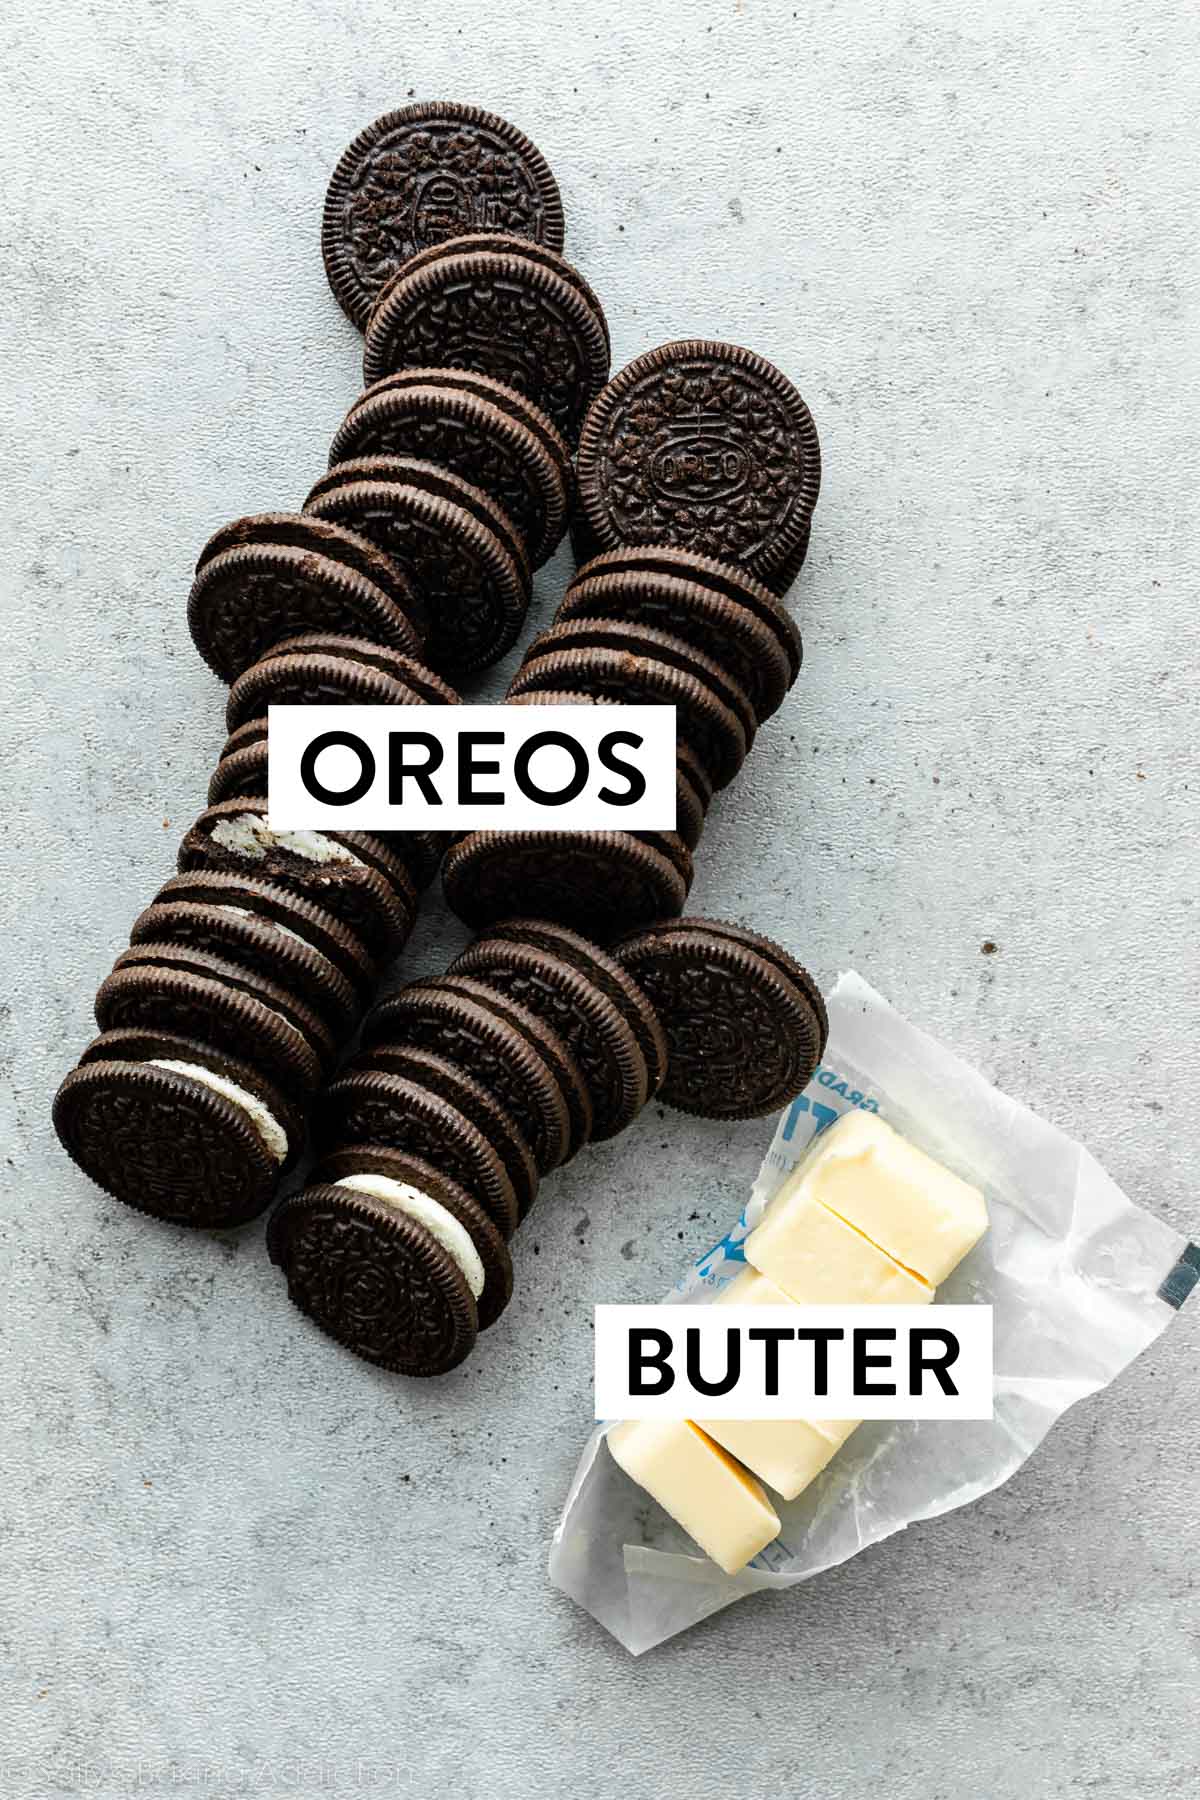 Oreo cookies lined up and butter sliced into 5 pieces on gray backdrop.